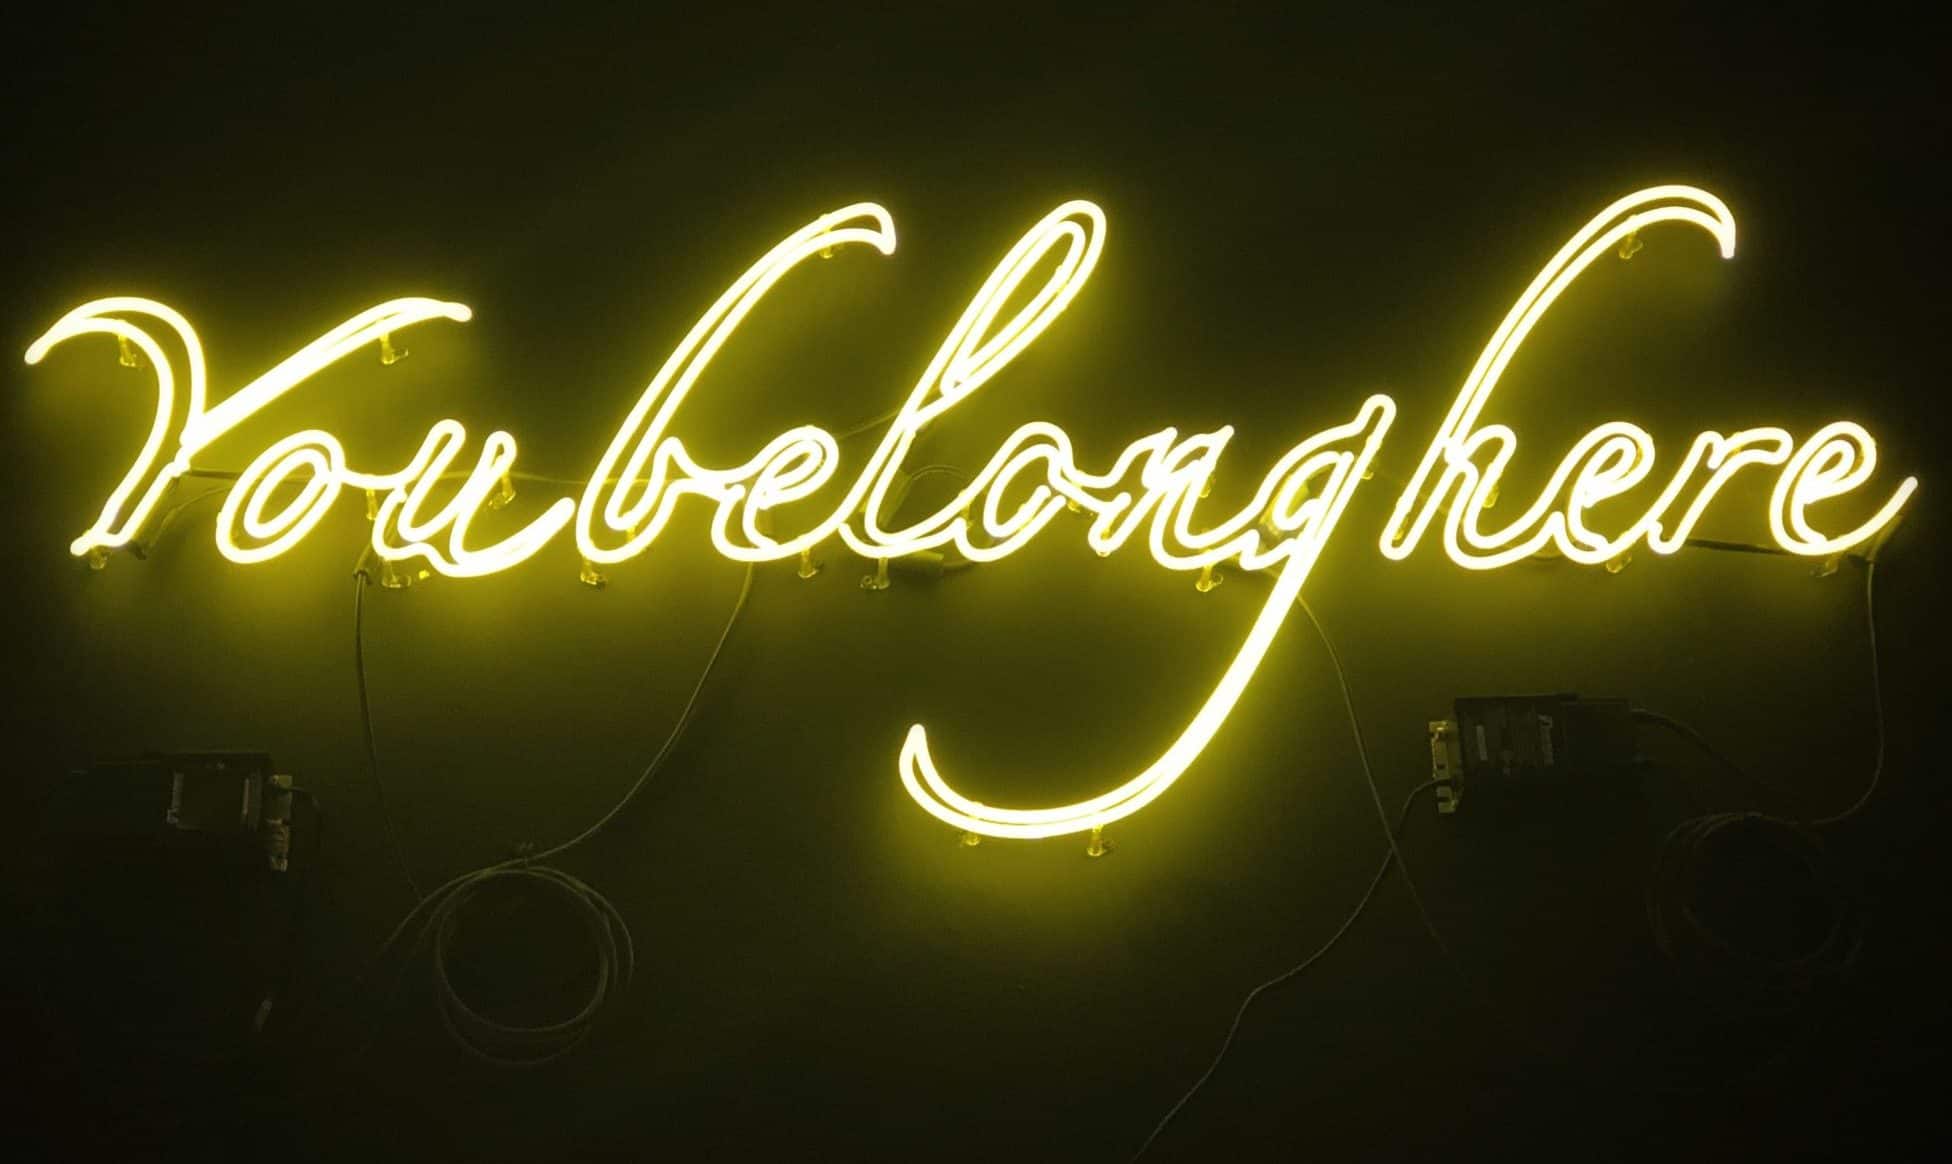 Neon sign 'you belong here' for portraying a great fit for the software team